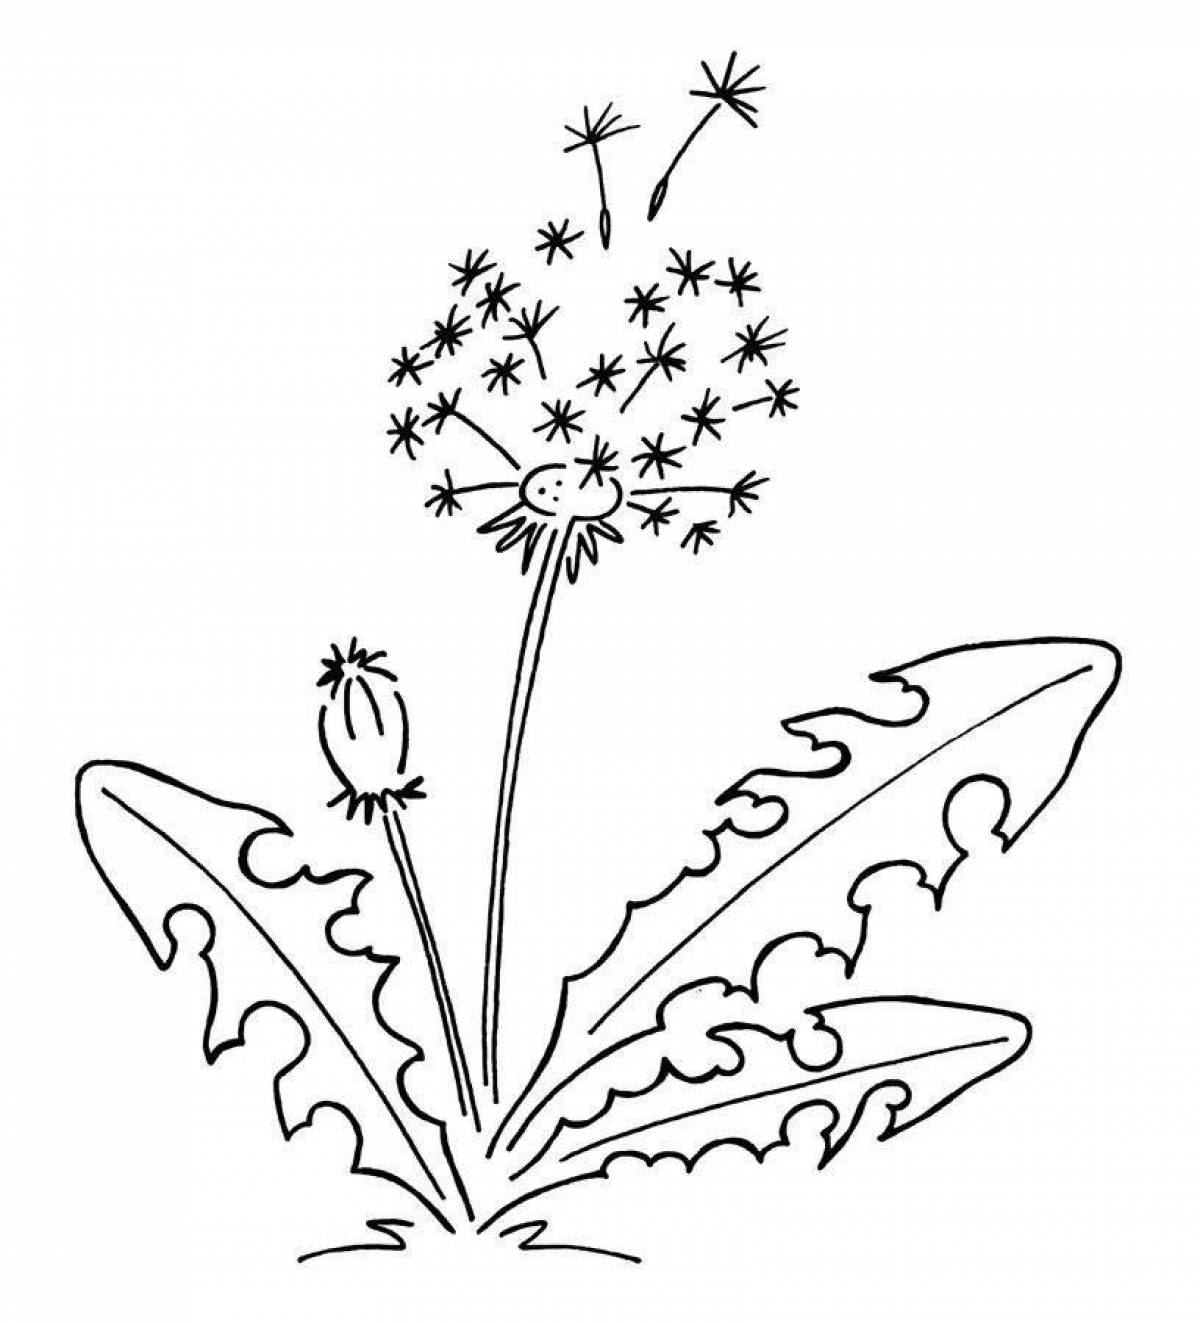 Coloring page cheerful dandelion